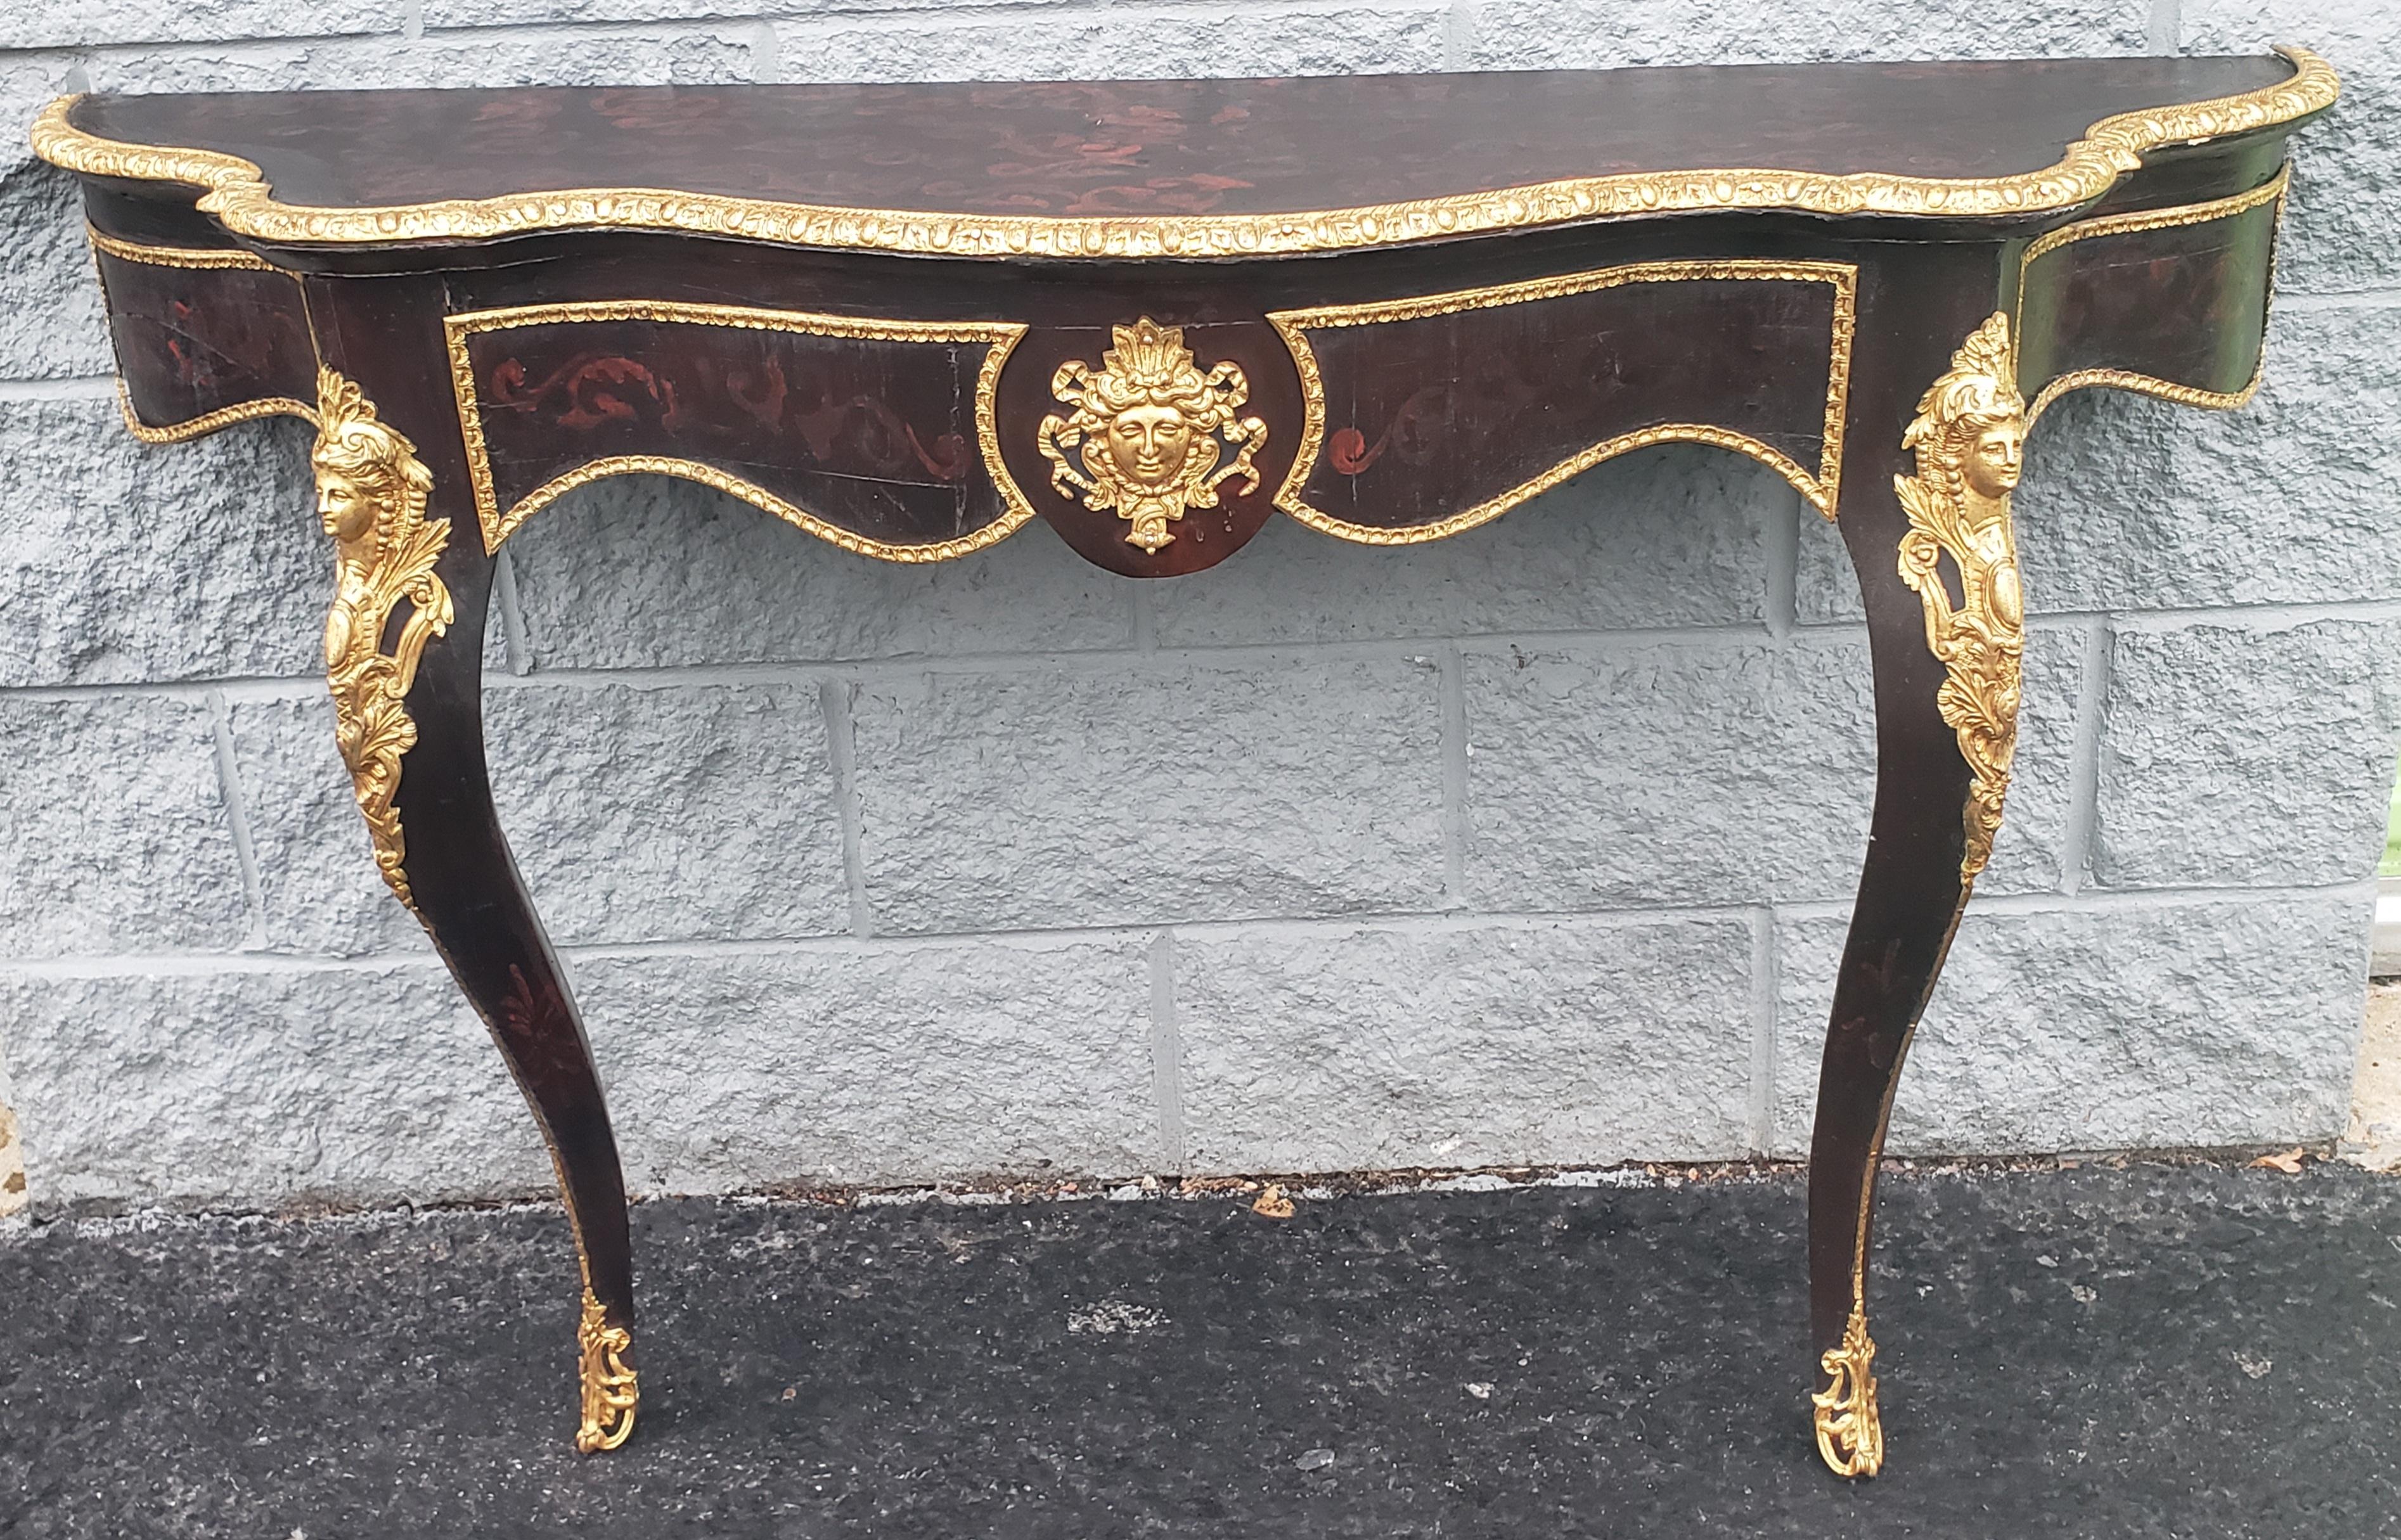 Hand-Crafted Large Louis Phillipe Ormolu & Giltwood French Console Wall Table, Circa 1840s For Sale